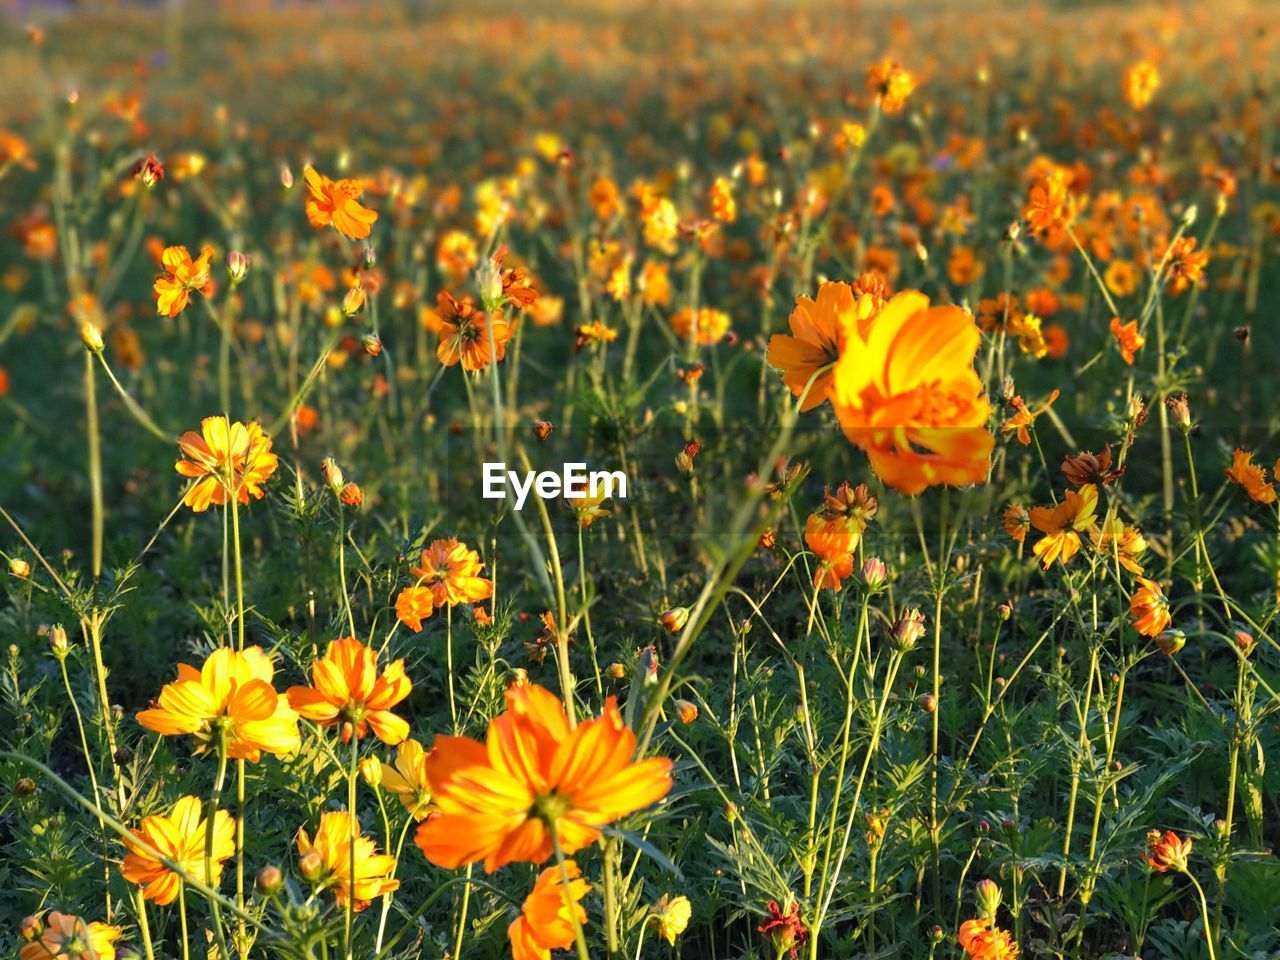 CLOSE-UP OF MARIGOLD FLOWERS BLOOMING ON FIELD